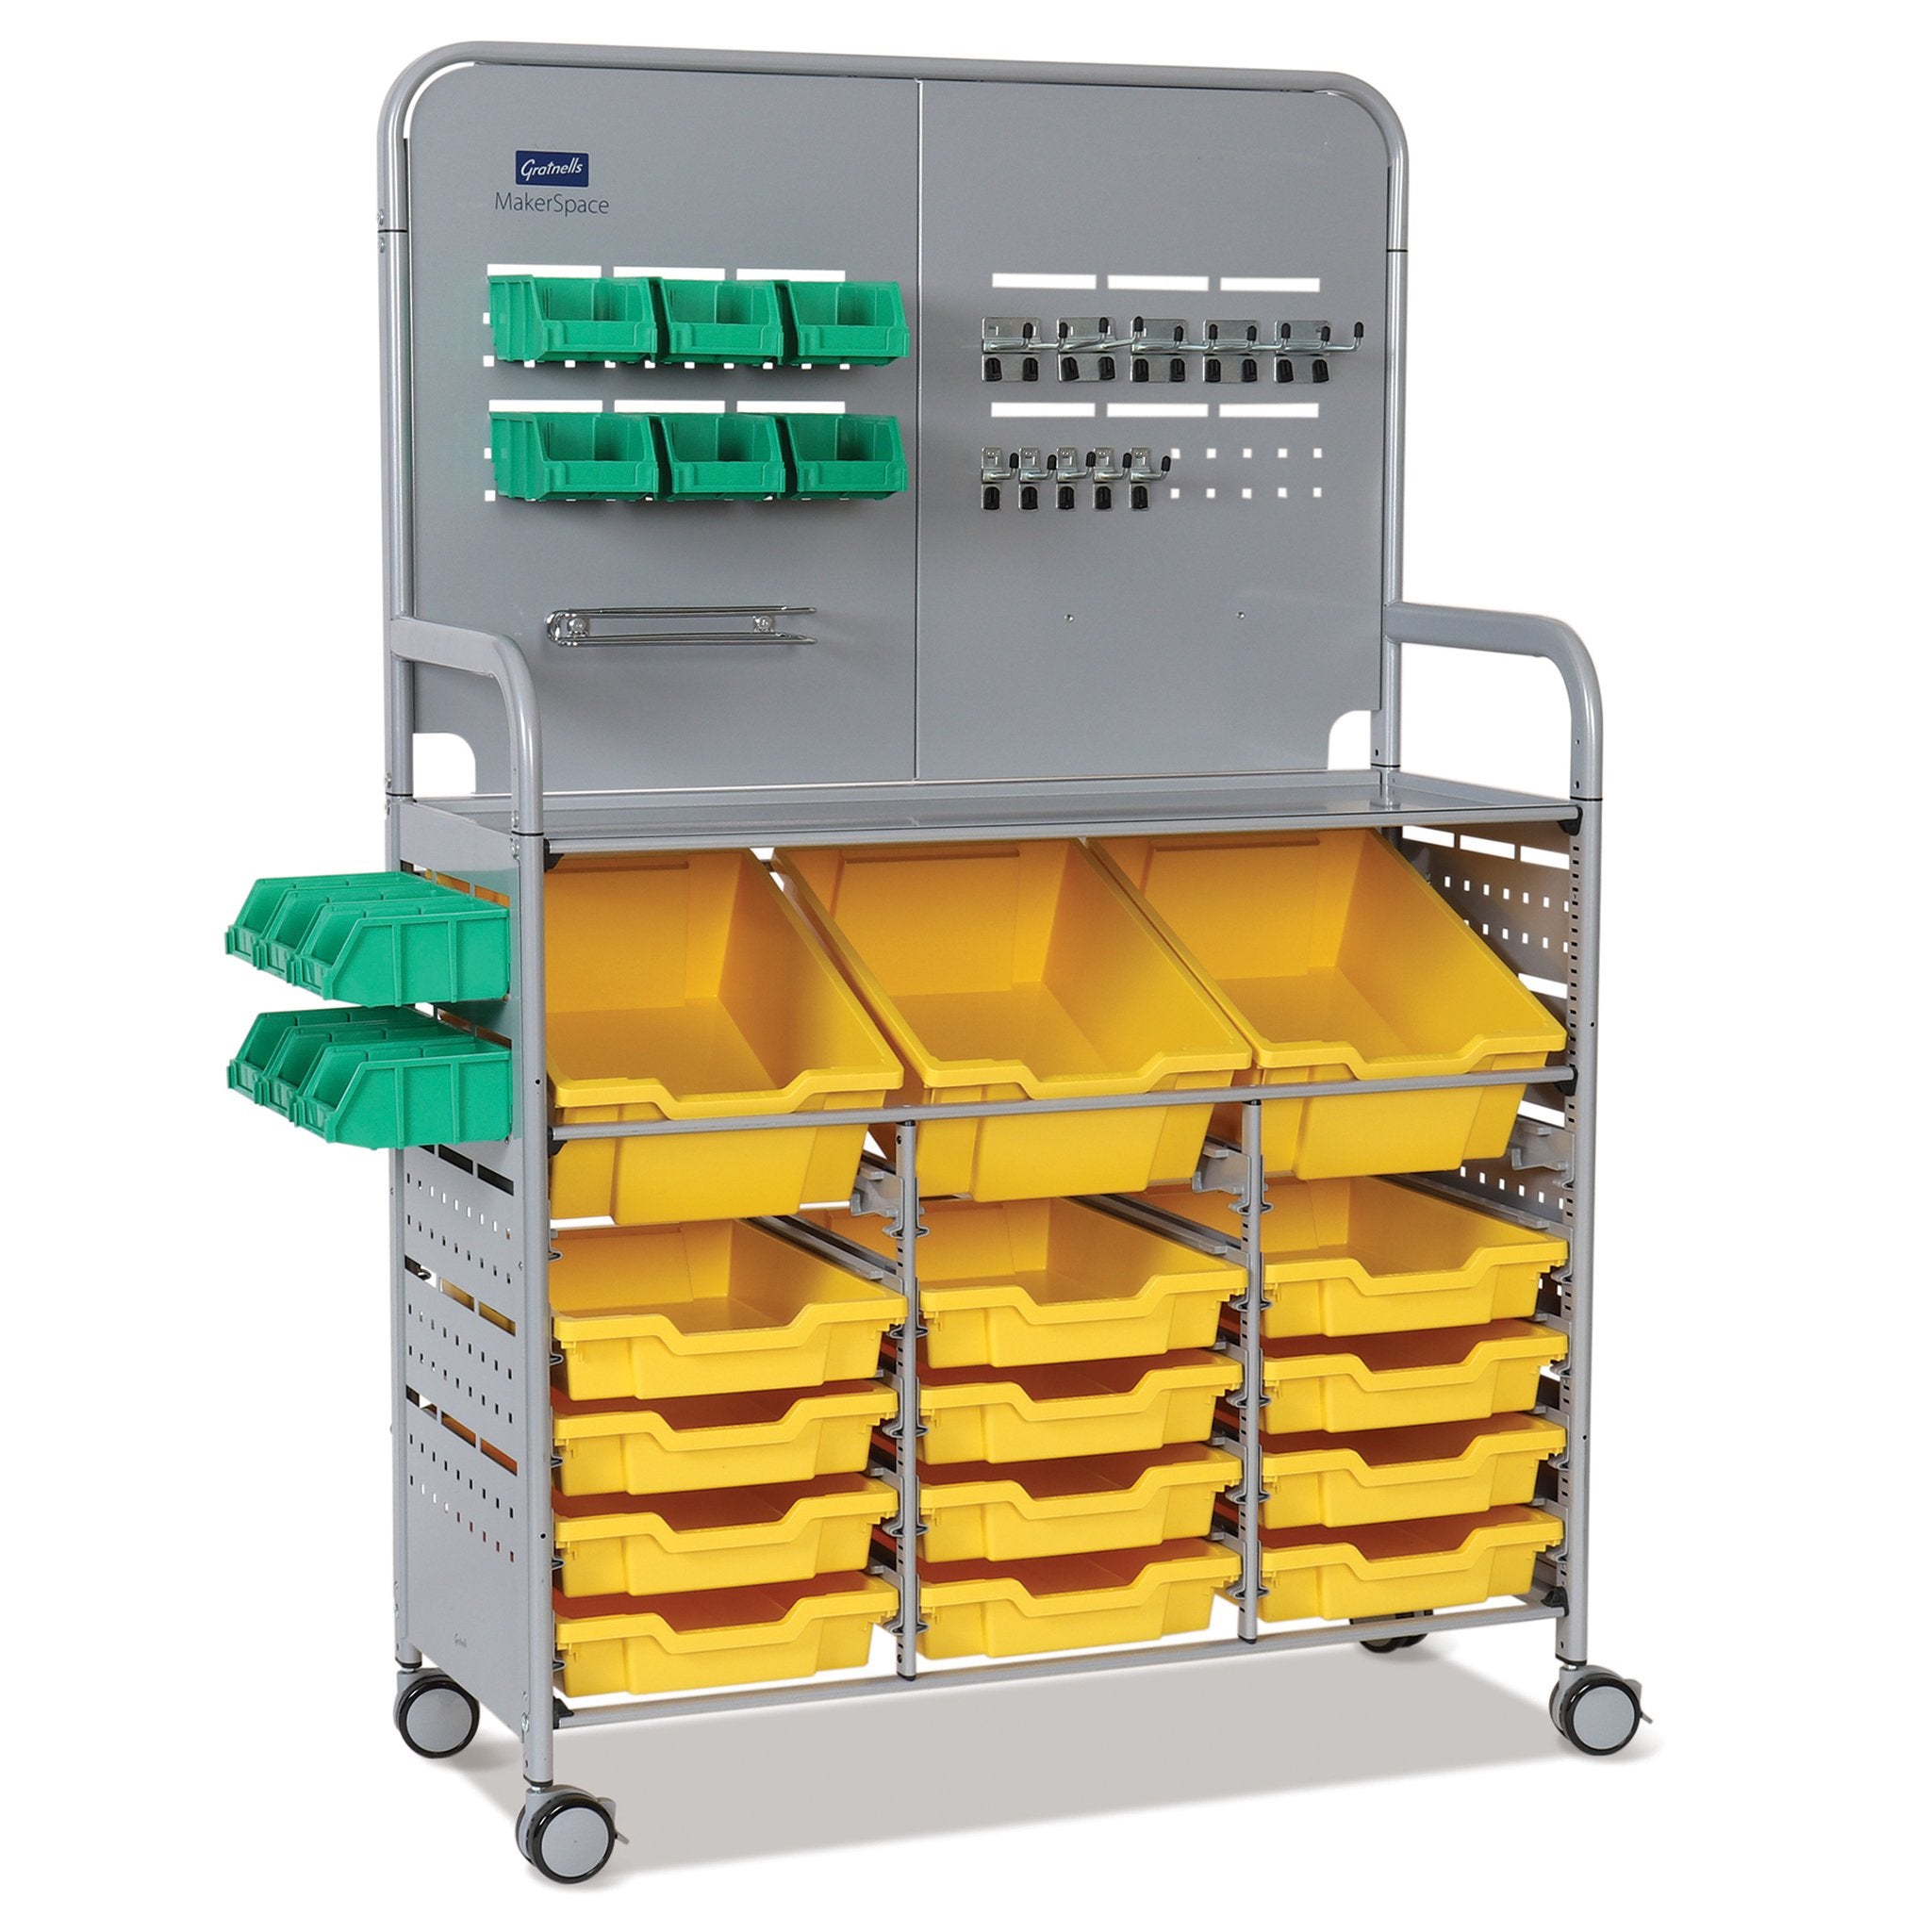 Gratnells MakerSpace STEM Trolley, Designed to work with the rest of the Callero range, the MakerSpace trolley can be configured with a variety of tray and storage bin options. The standard Gratnells trays can be interchanged with fixed storage to transport materials and tools to a work area, and the trolley can also be used as a standalone workstation, with ample storage for many materials and hand tools. There are no sharp edges or corners and the ergonomic handles as well as 75mm castors make maneuvering